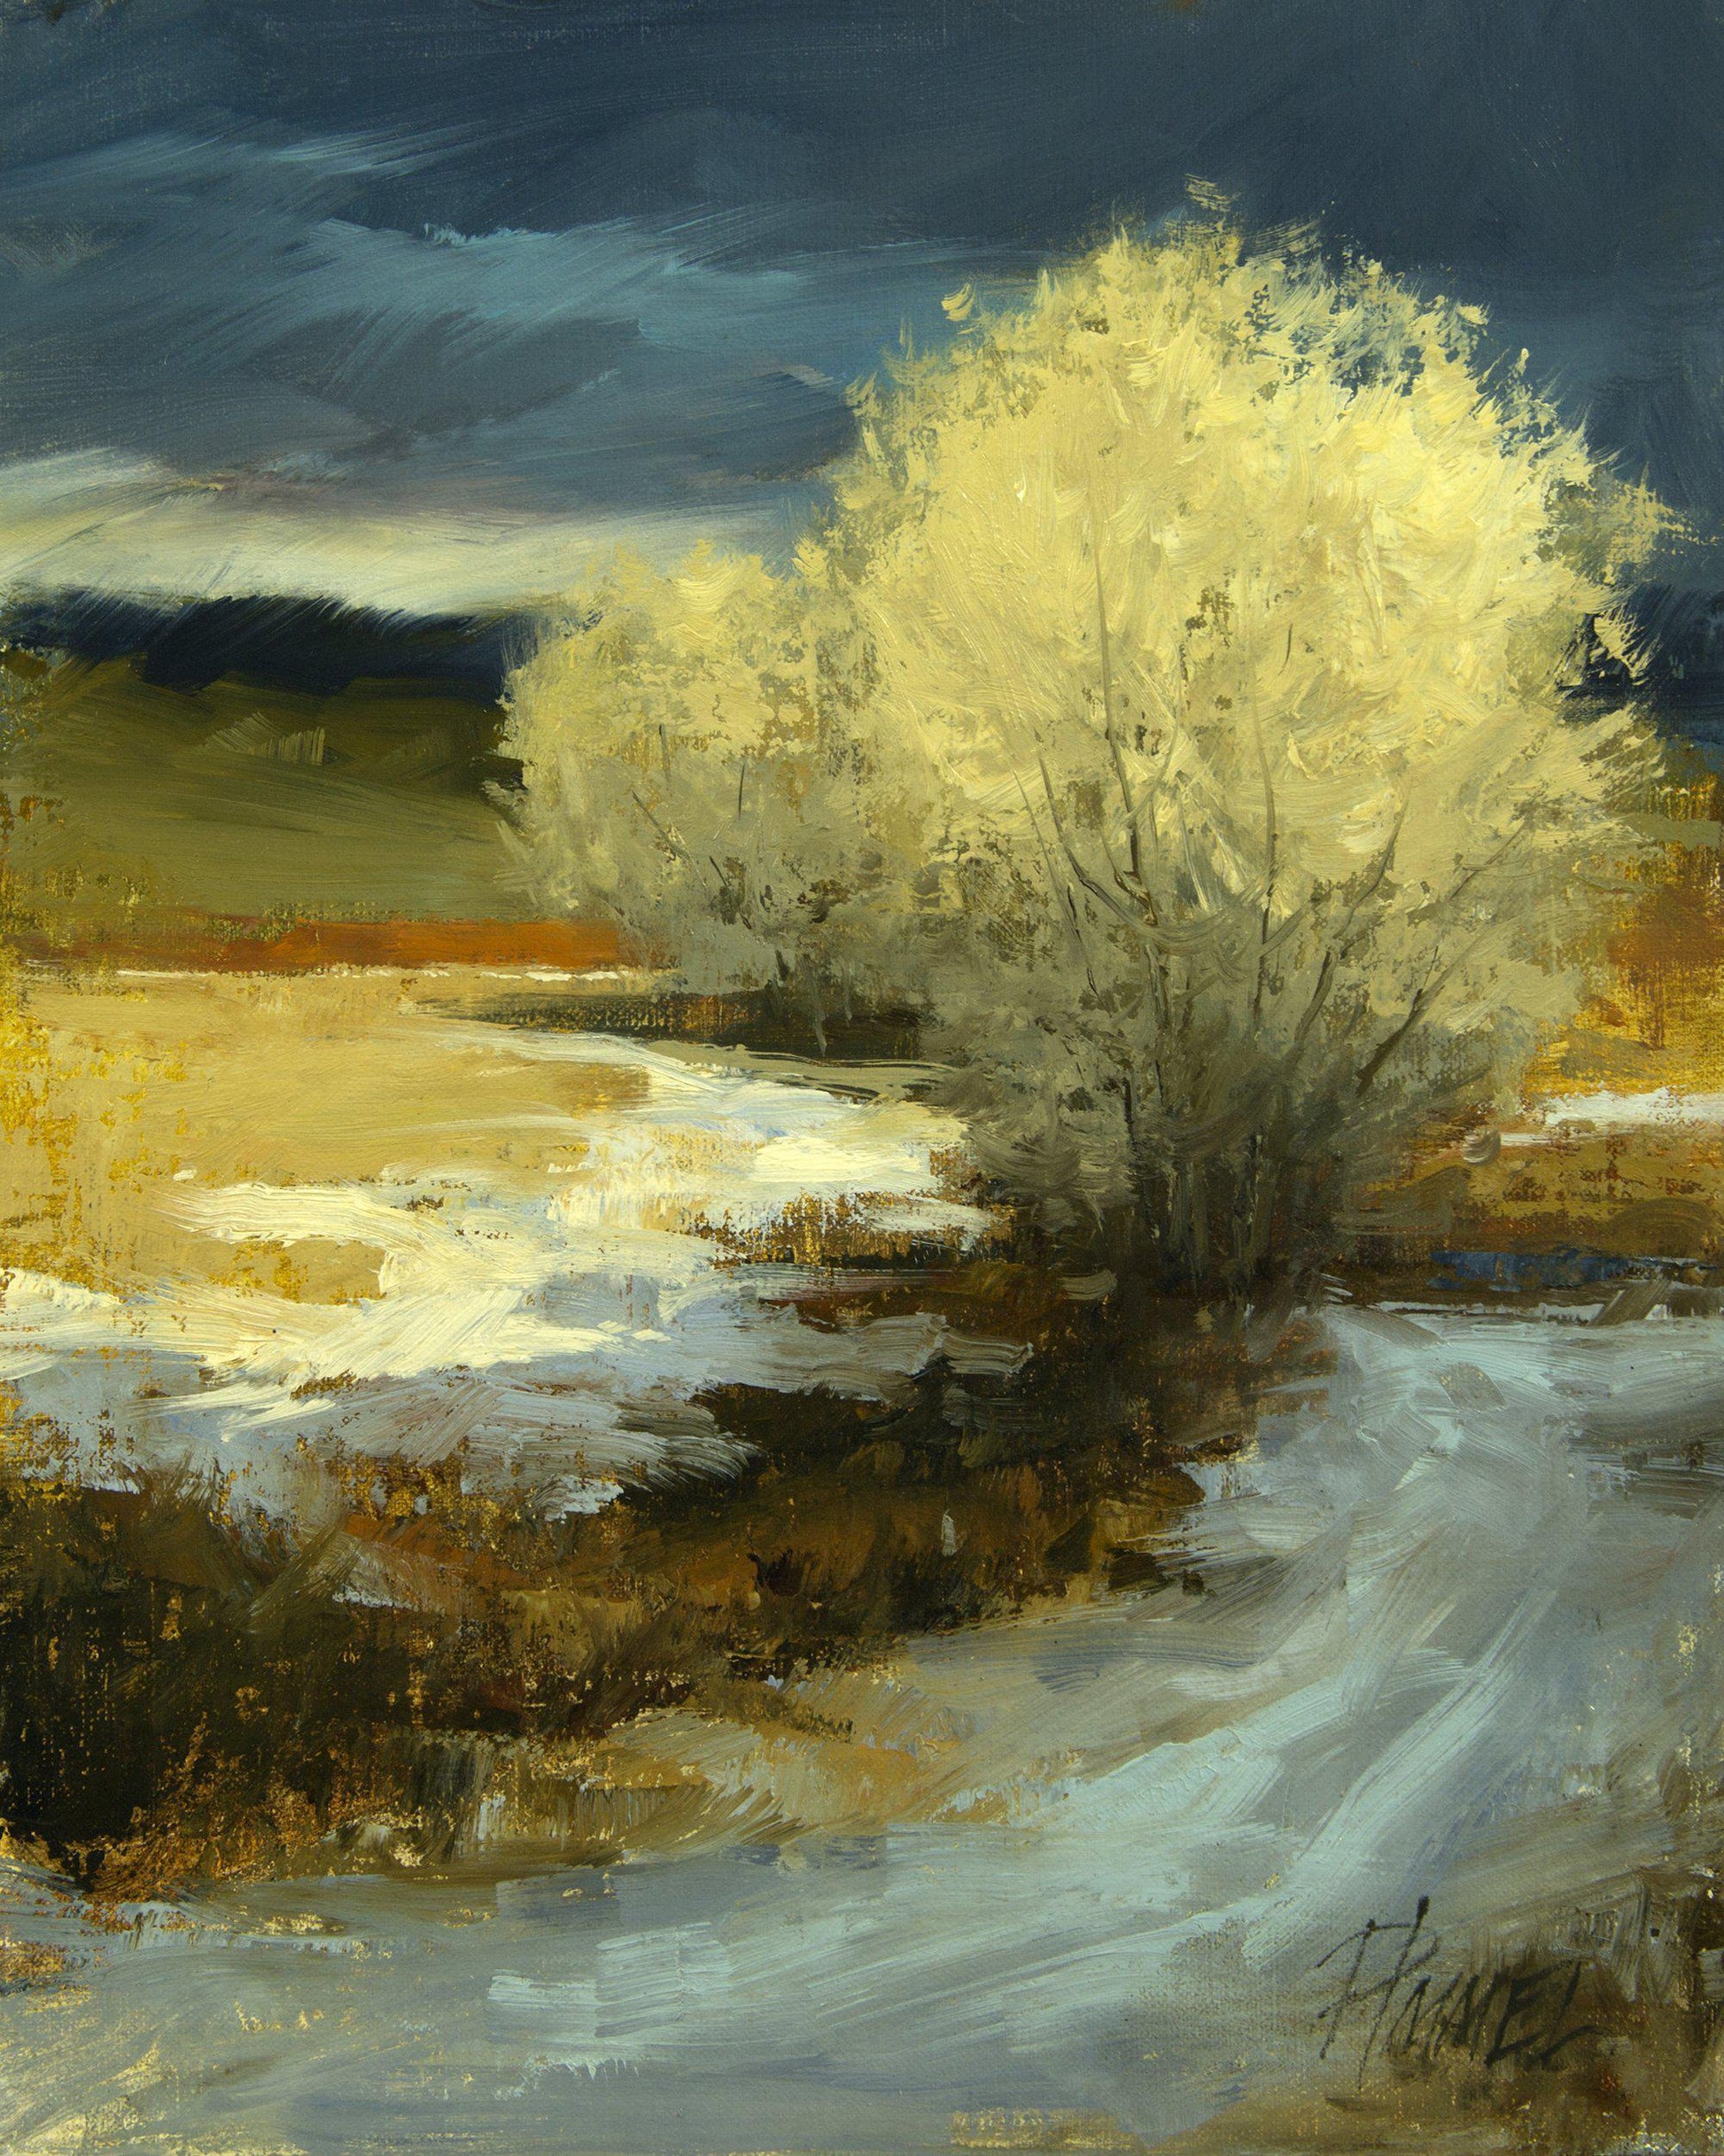 North Of Hondo-Painting-Peggy Immel-Sorrel Sky Gallery